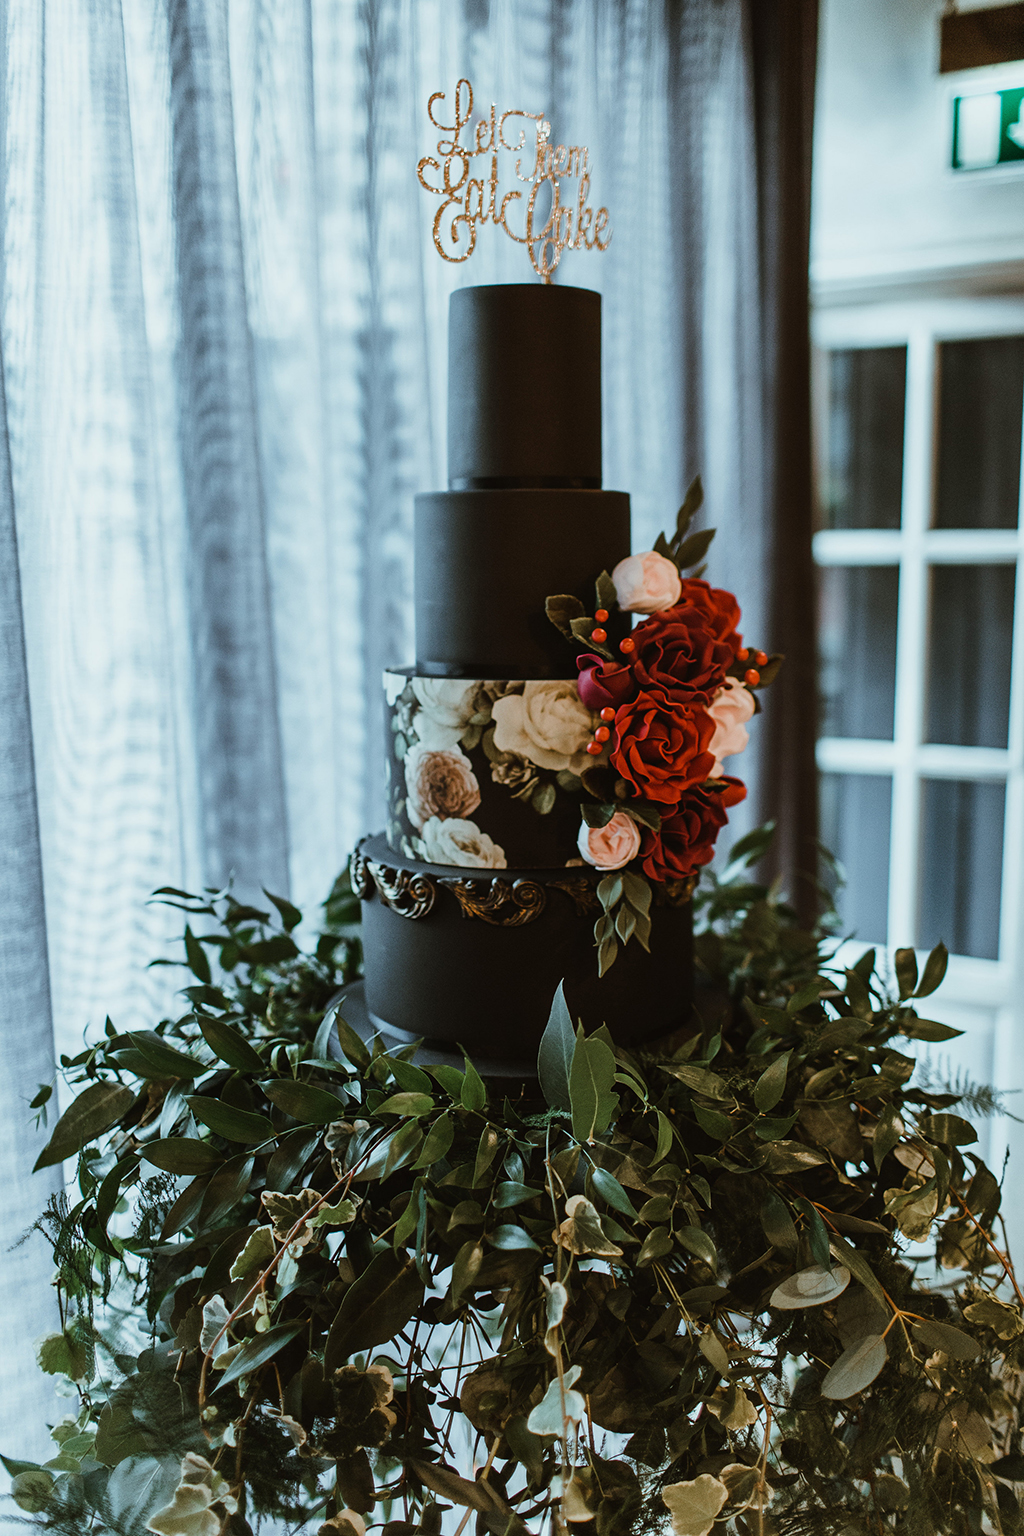 The wedding cake was a matte black one, with a floral tier and sugar and real blooms with a calligraphy topper